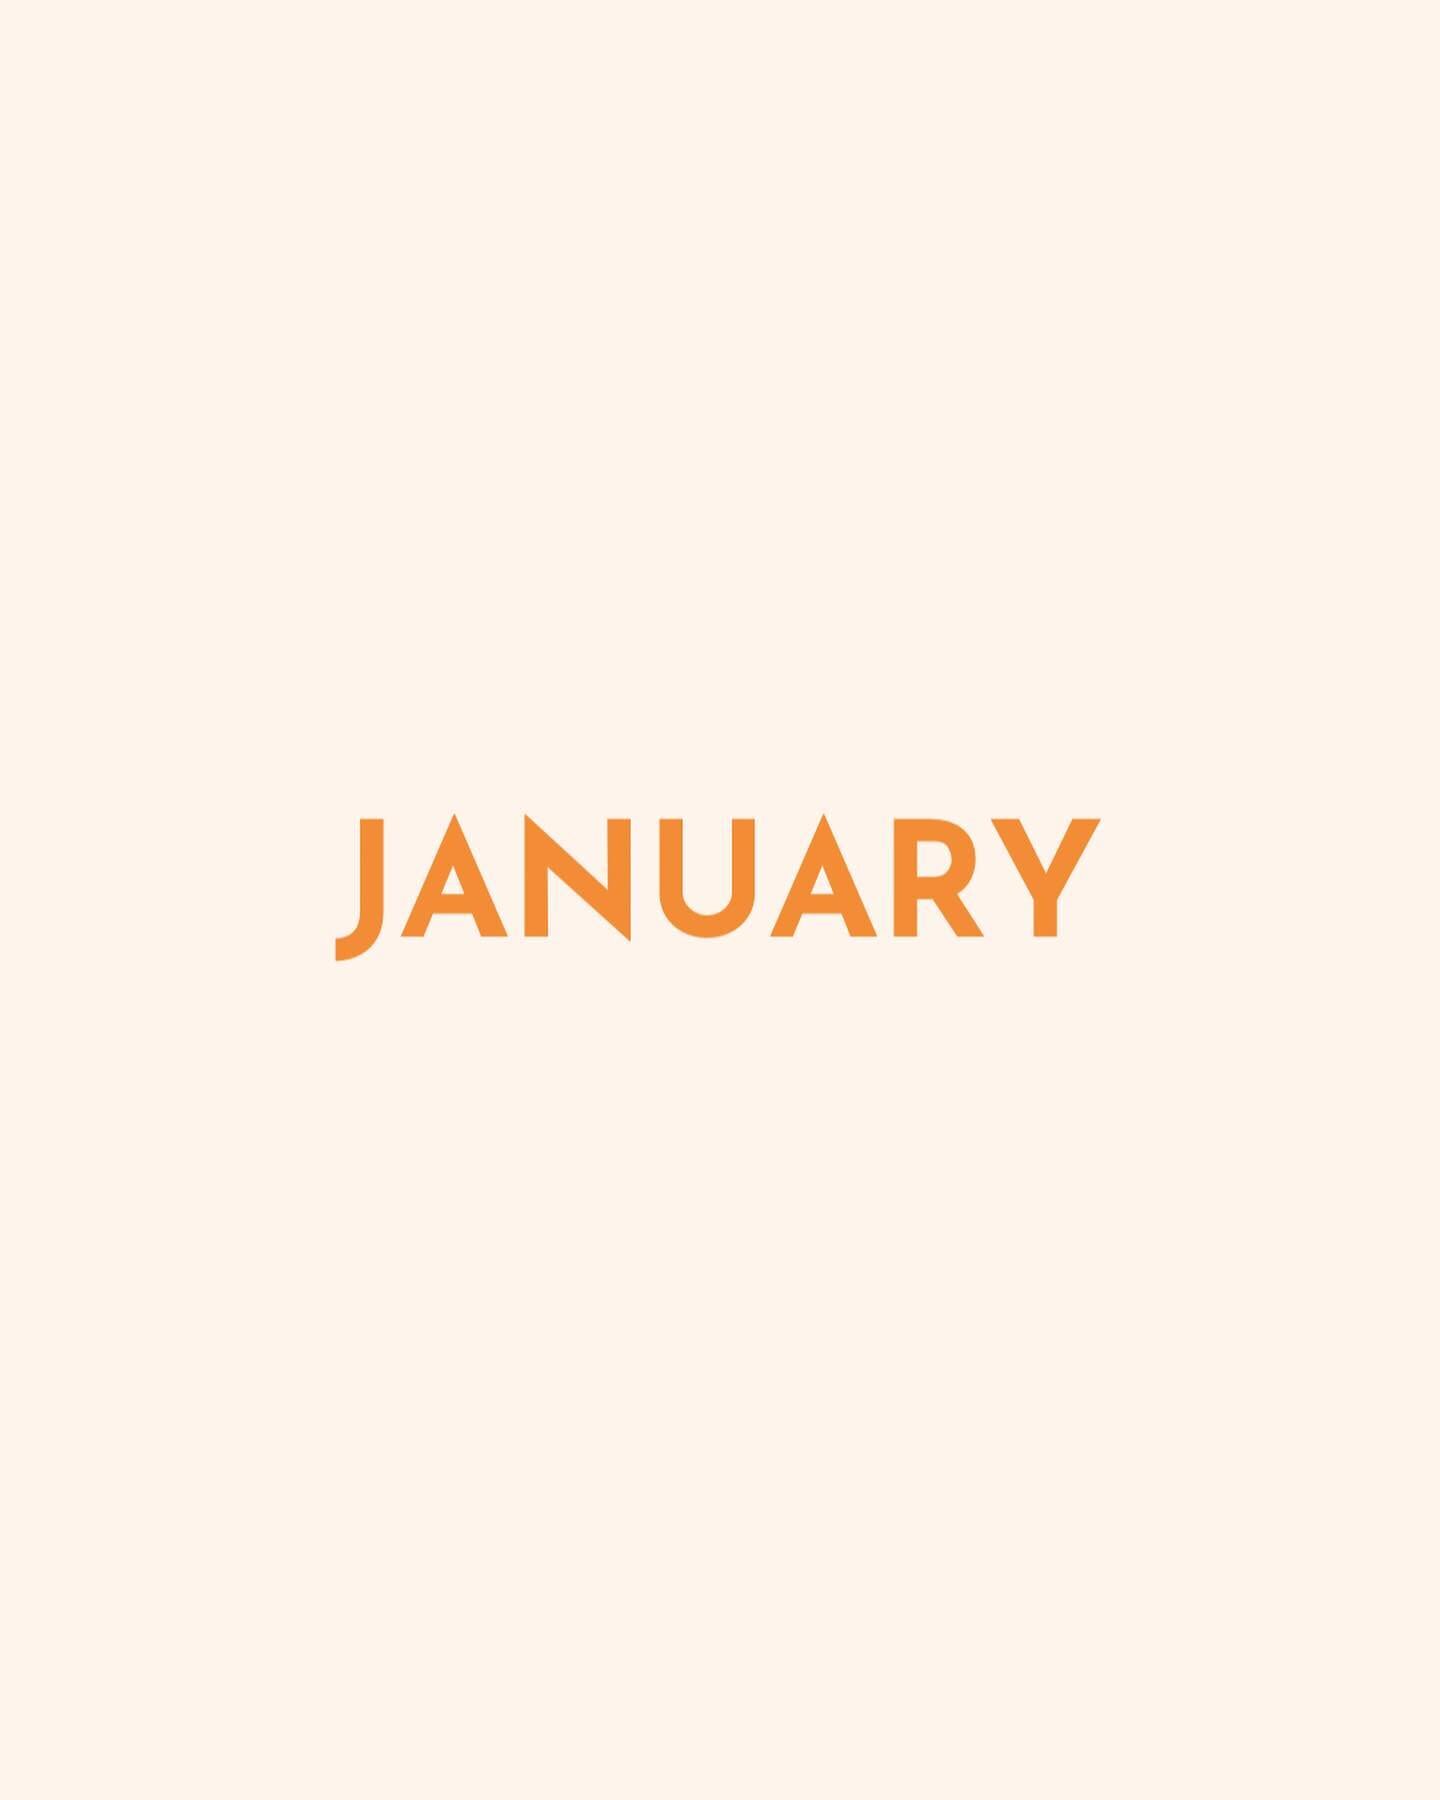 My busiest January yet 😌 This month was supposed to be quiet, but instead it became one of the most fun and exciting months. In personal news, I baked the best carrot cake of my life 🥕

#melbournephotographer #melbournecommercialphotographer